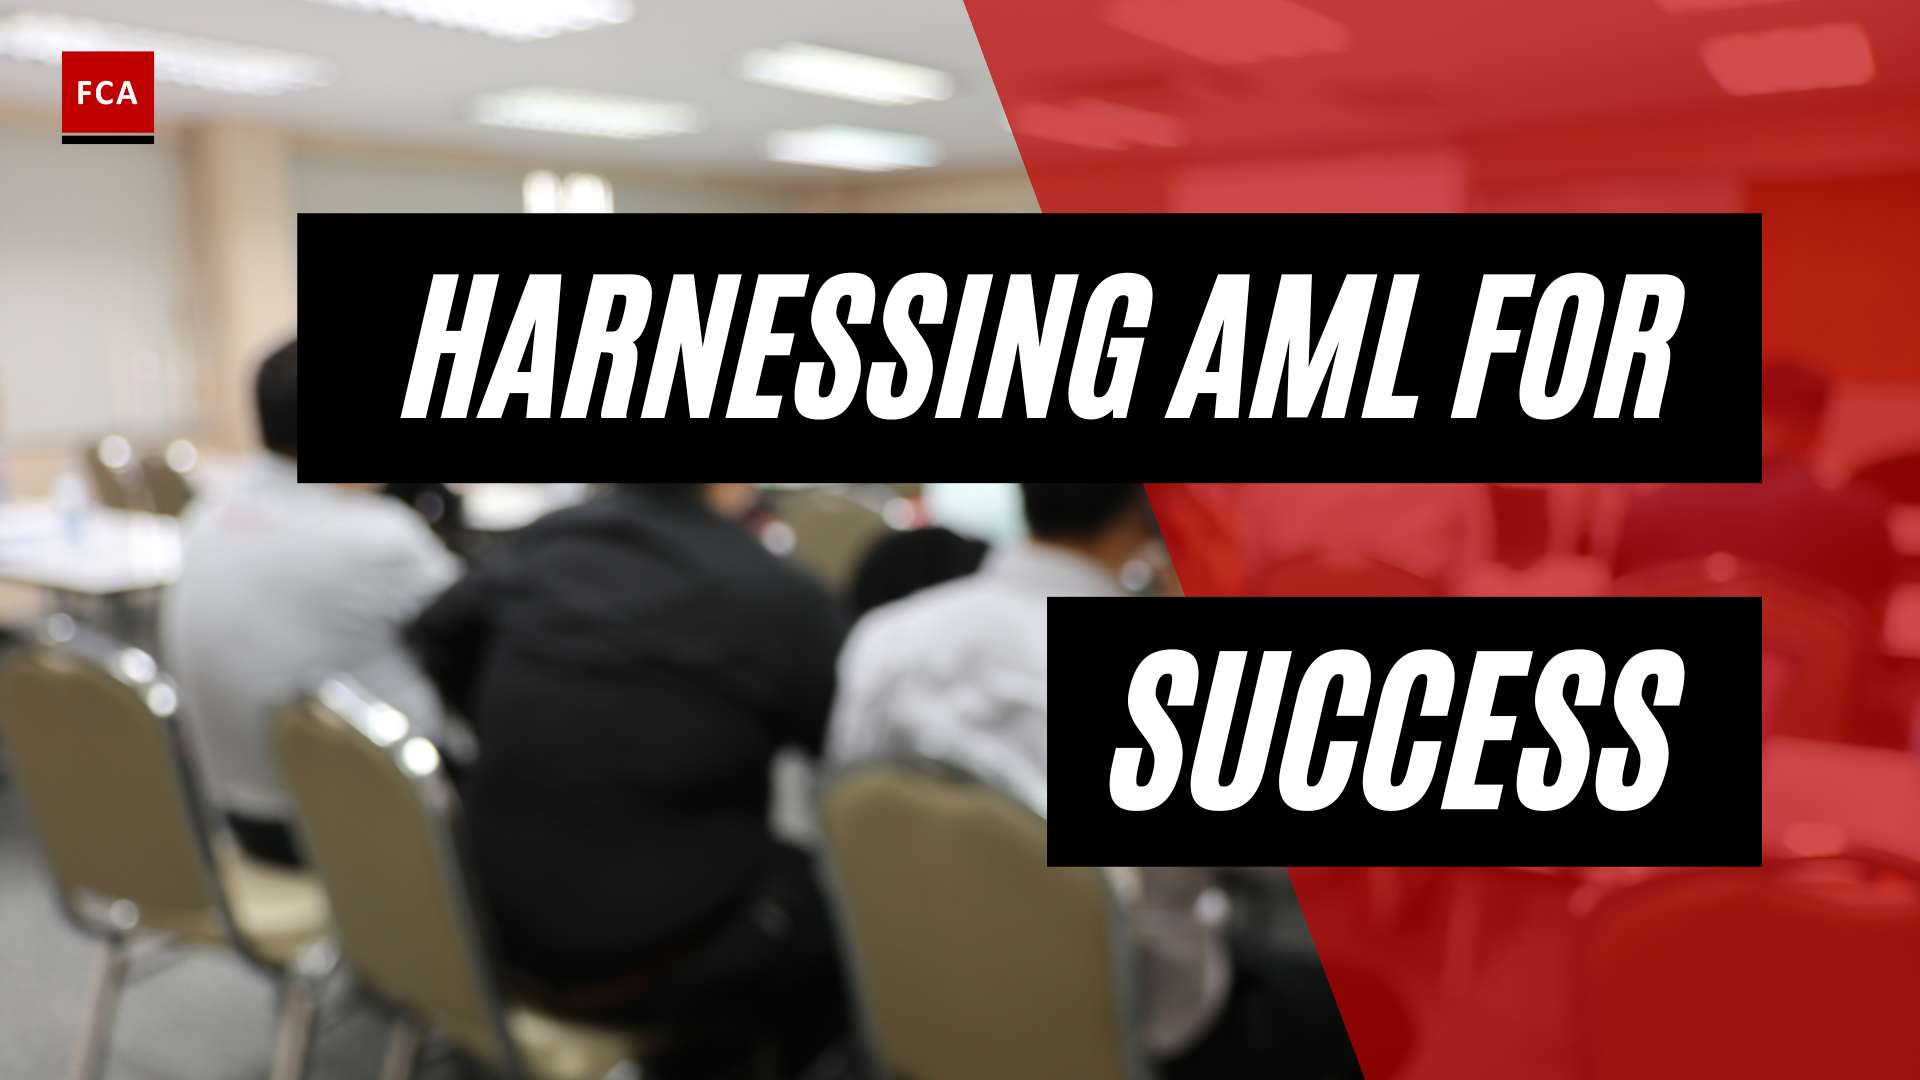 Beyond Regulations: Harnessing Aml Training For Compliance Success